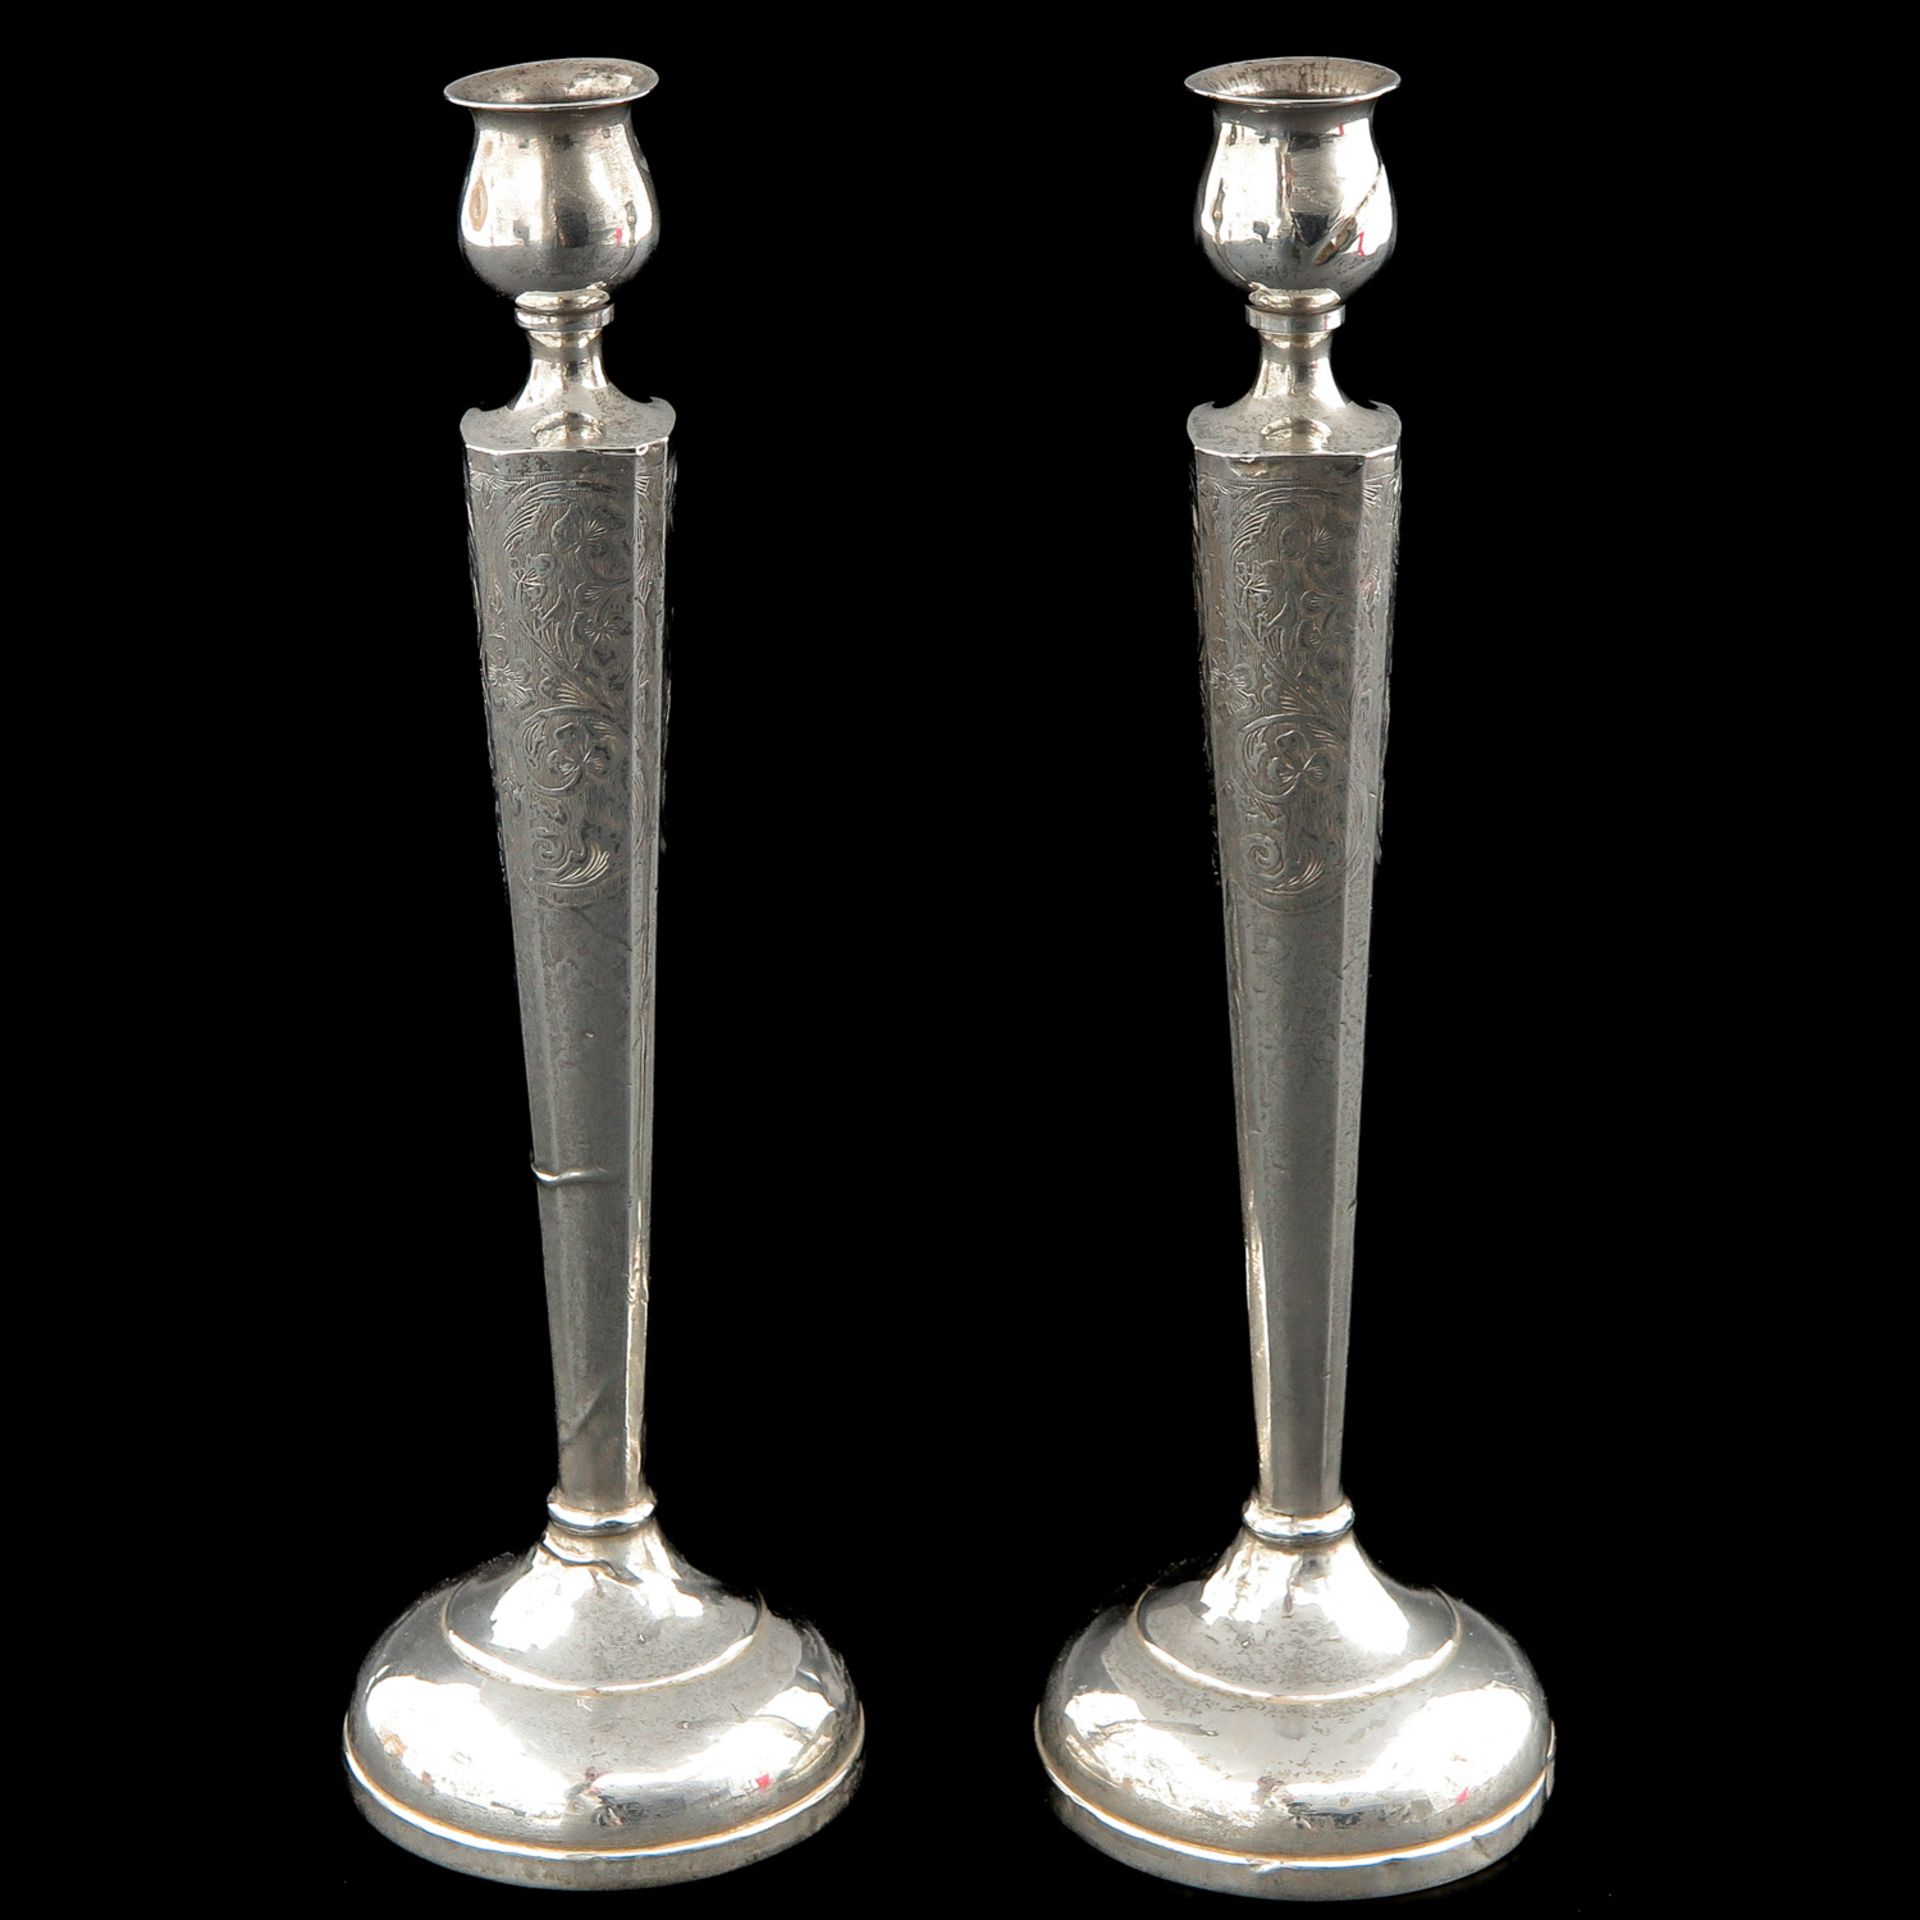 A Pair of Sterling Silver Candlesticks